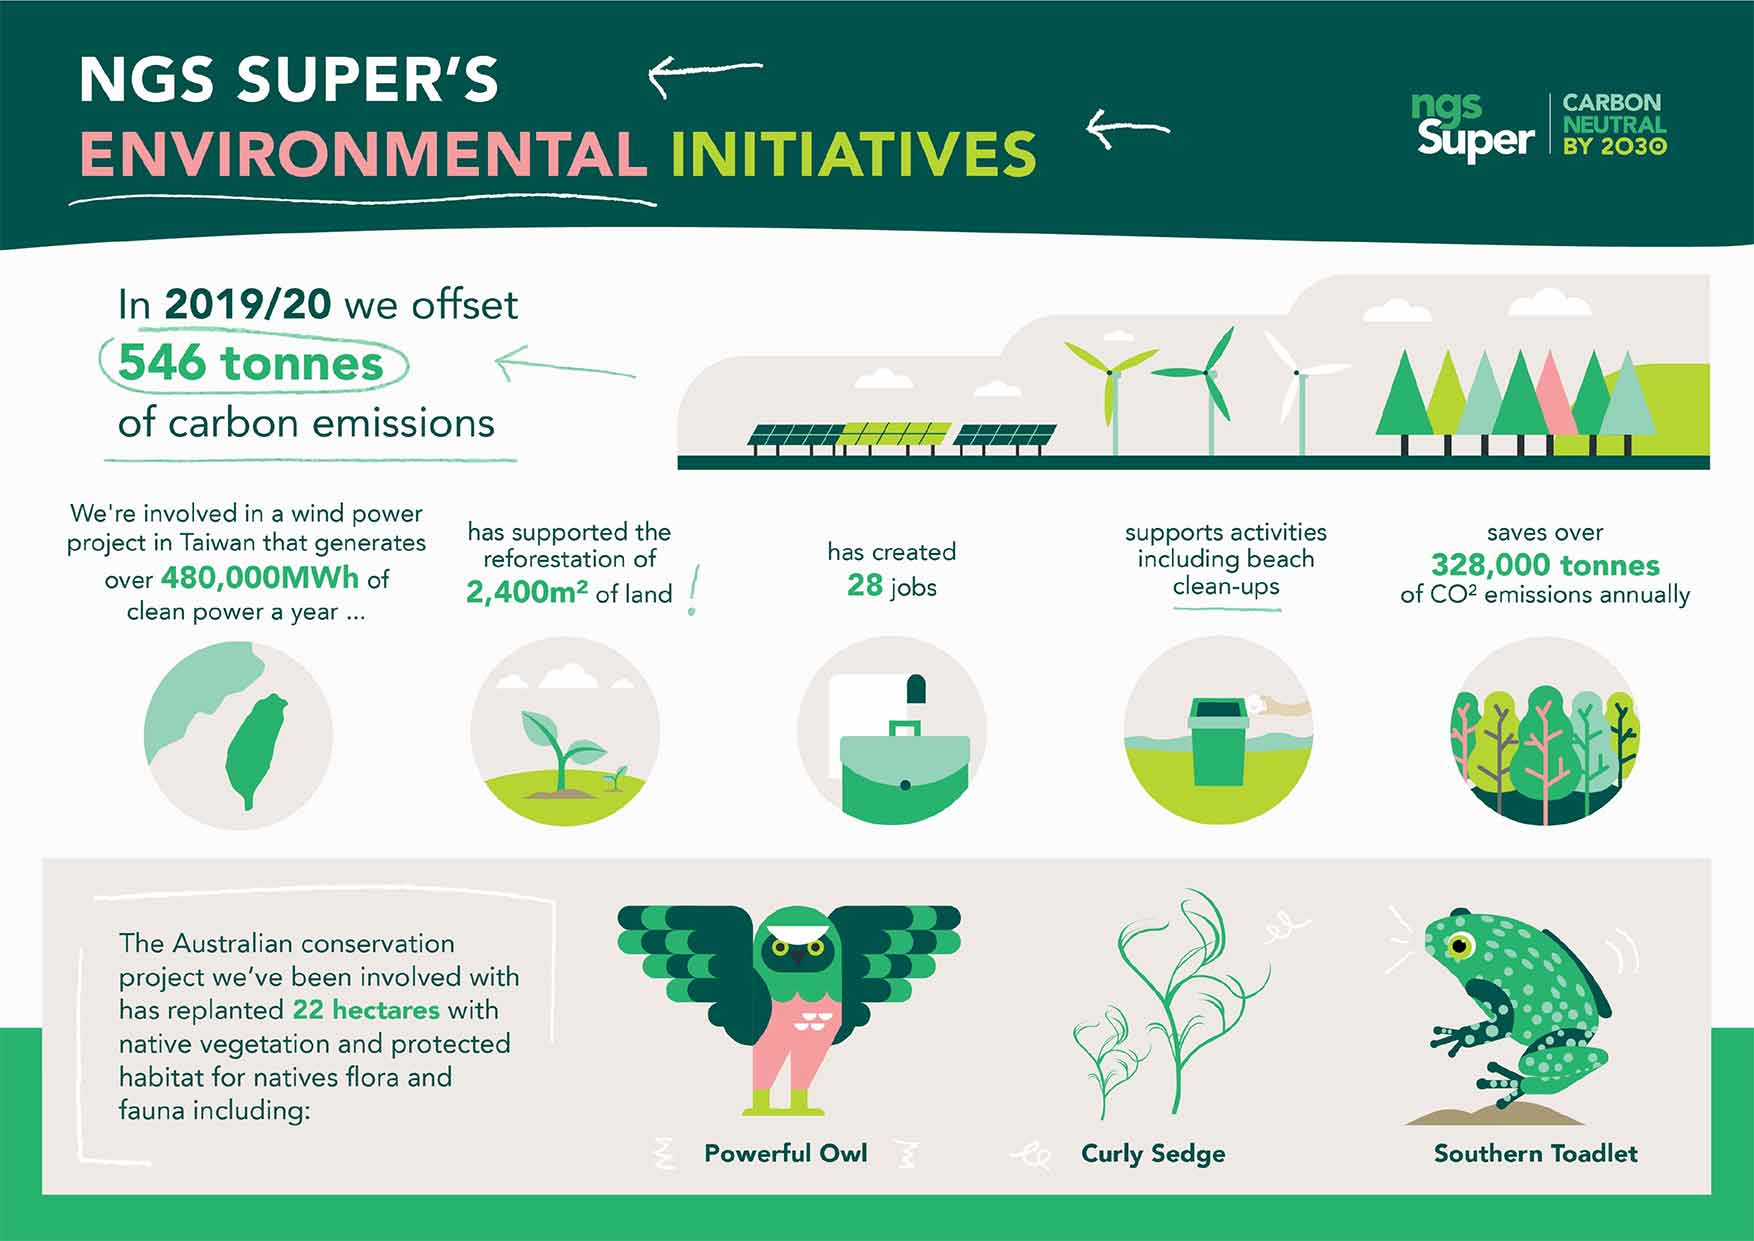 NGS Super's Environment Initiatives infographic